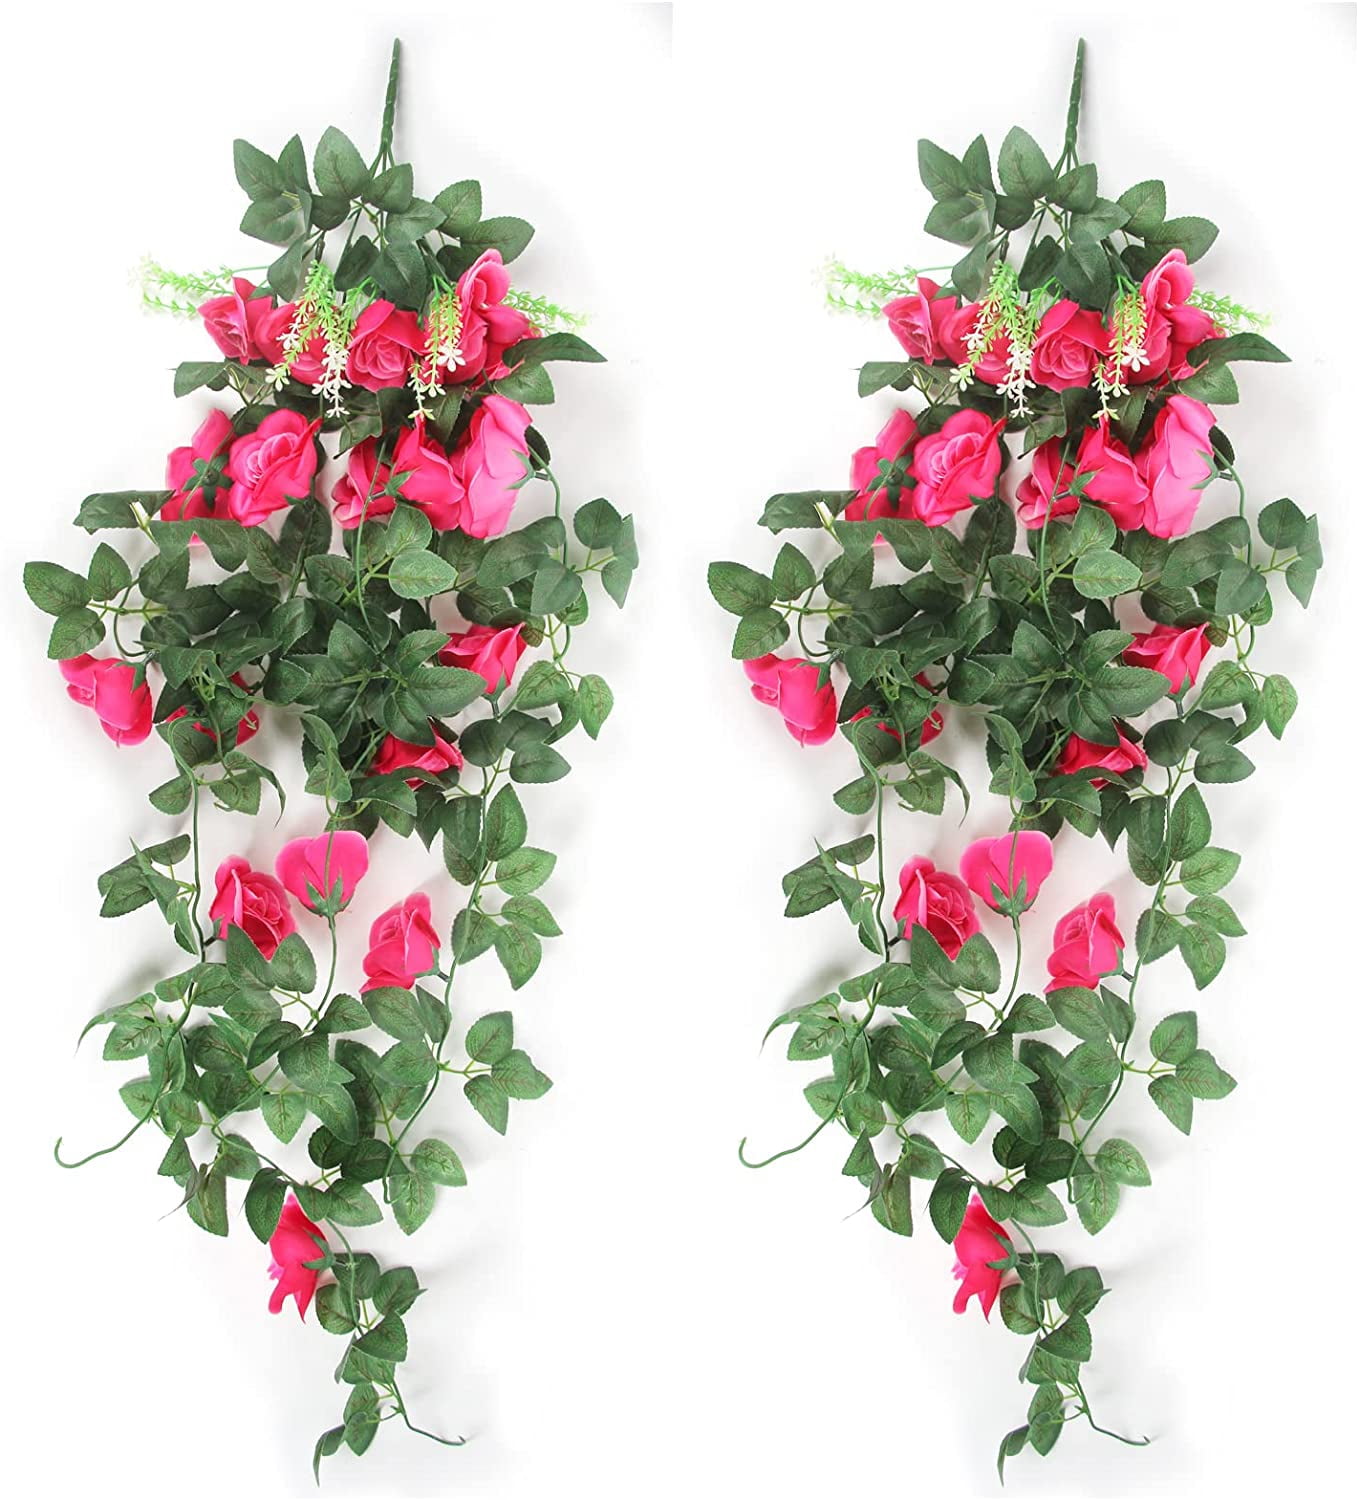 Haoyuetch 2PCS Artificial Rose Vine Flowers with Green Leaves,3Ft Hanging  Rose Ivy Plants for Home Wedding Party Garden Wall Decoration (Champagne)